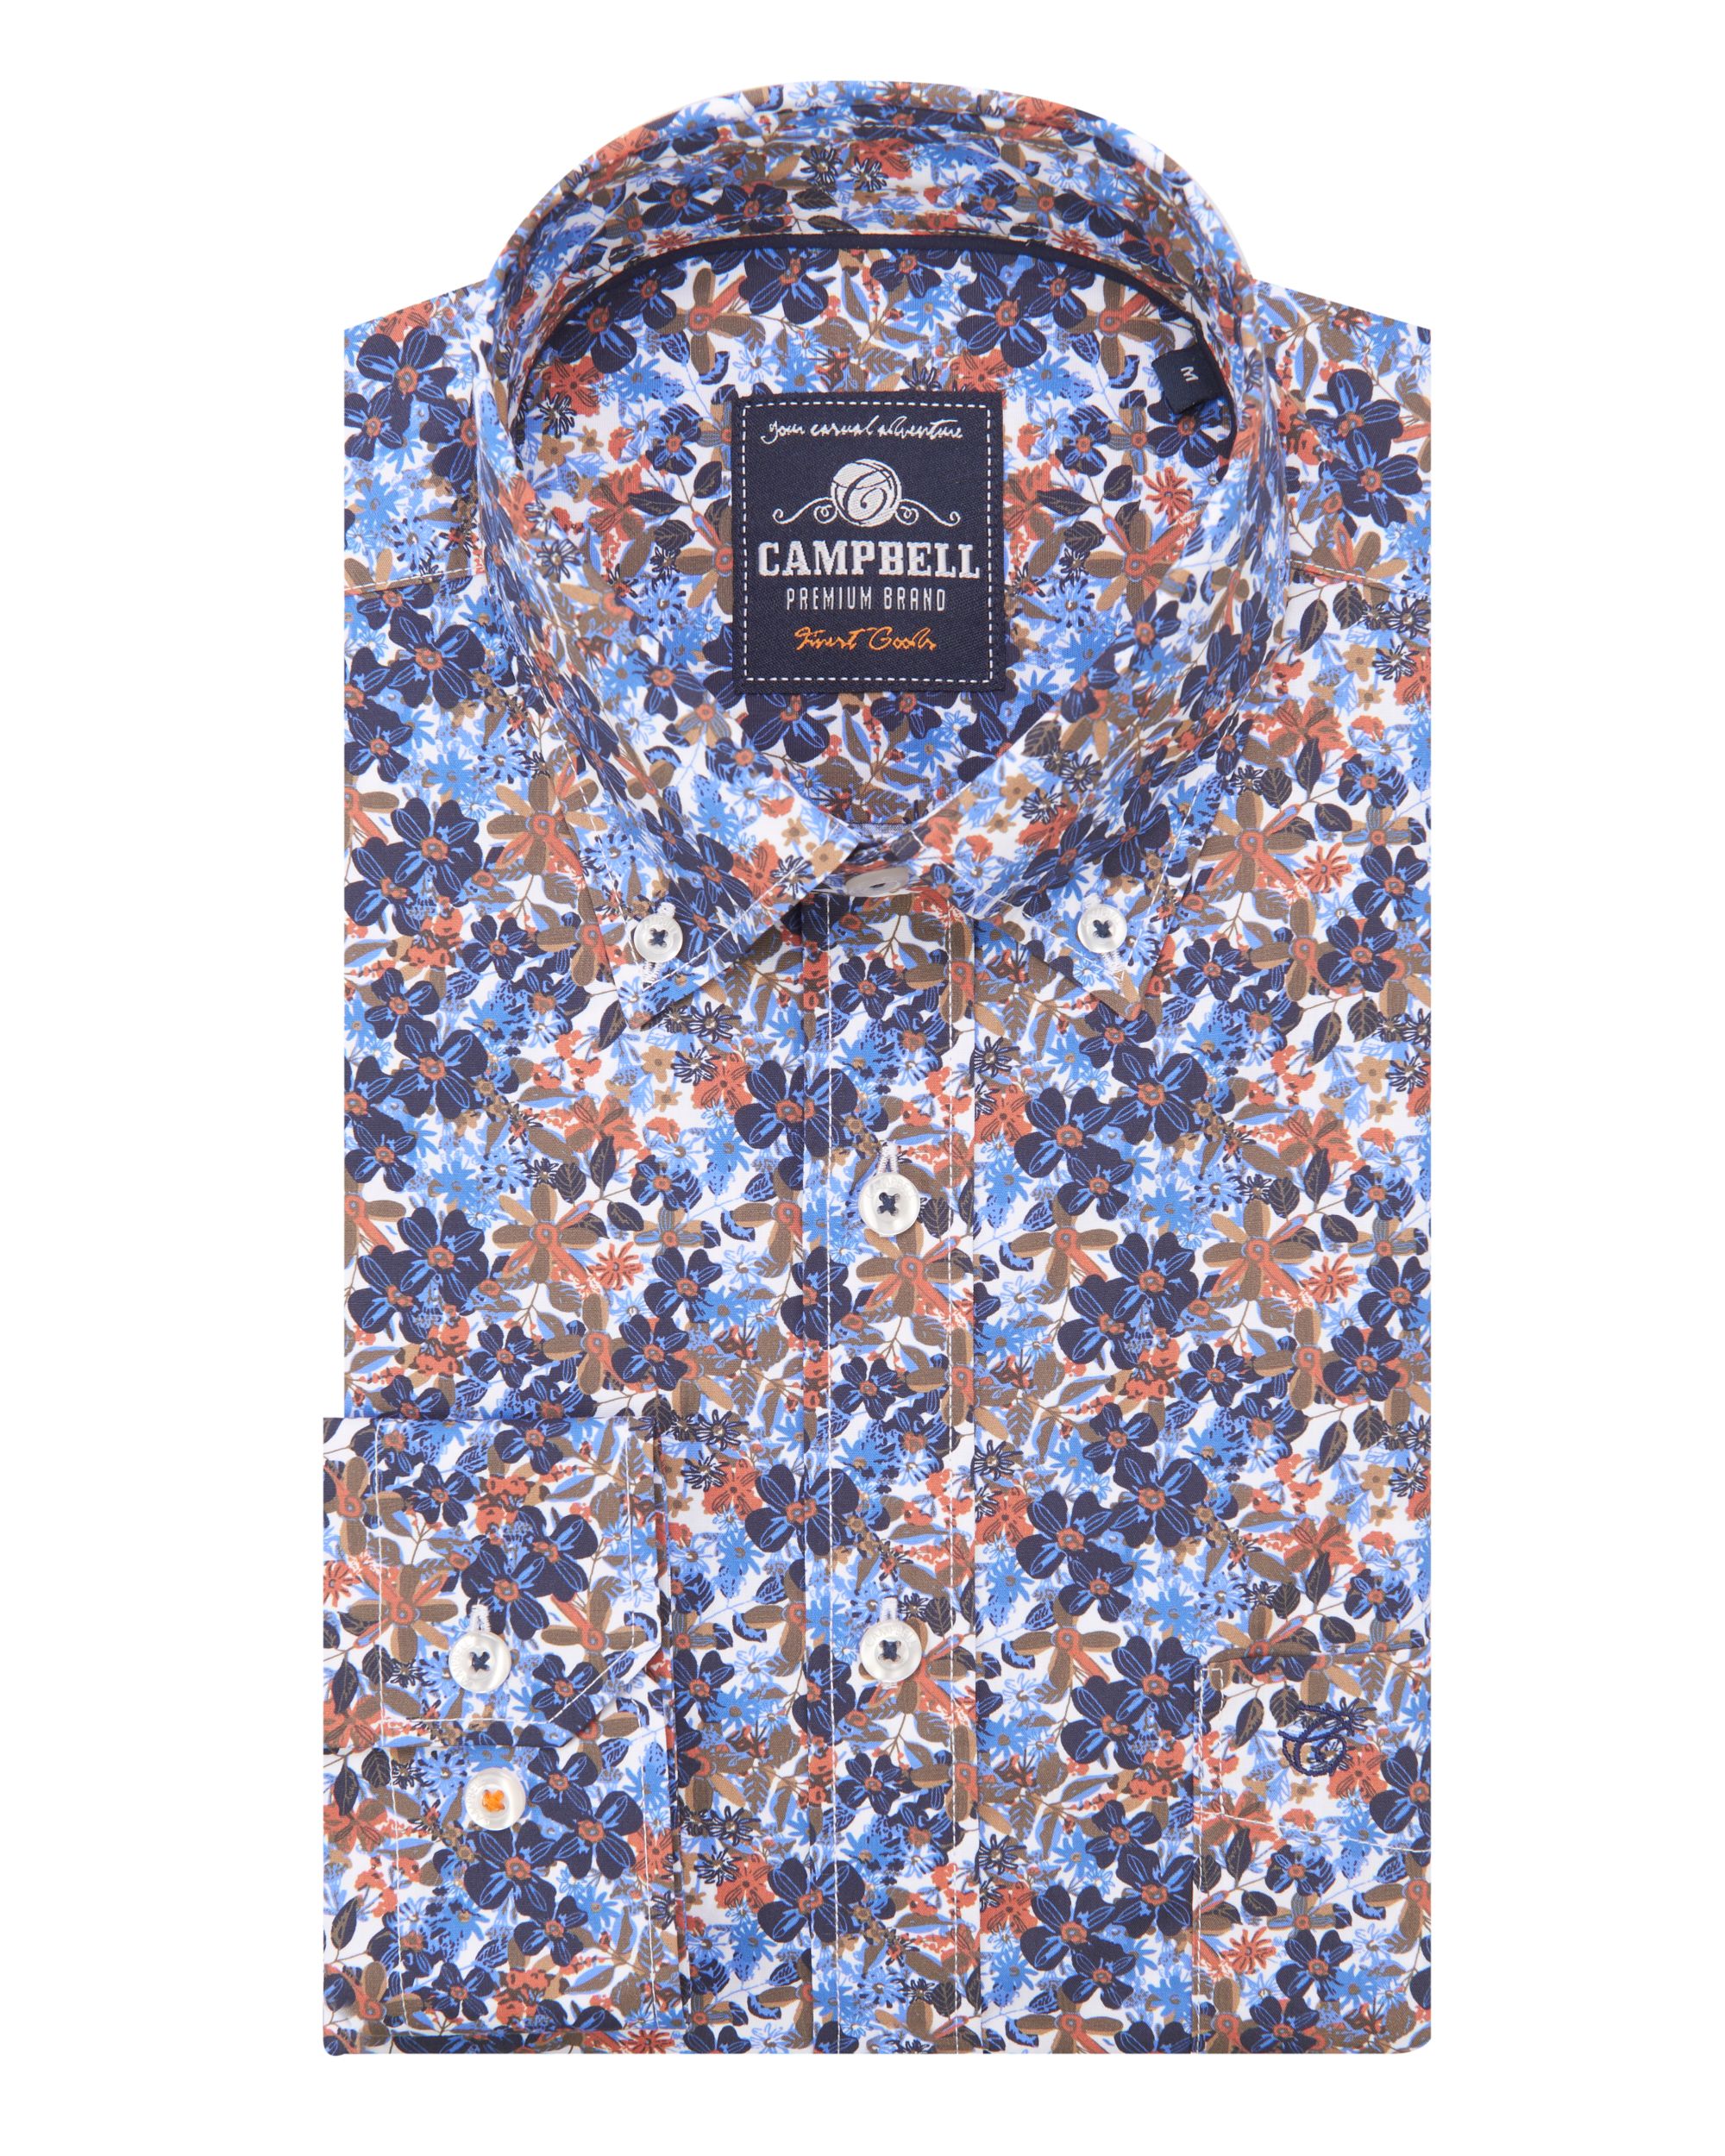 Campbell Classic Casual Overhemd LM Blauw dessin 084663-001-L